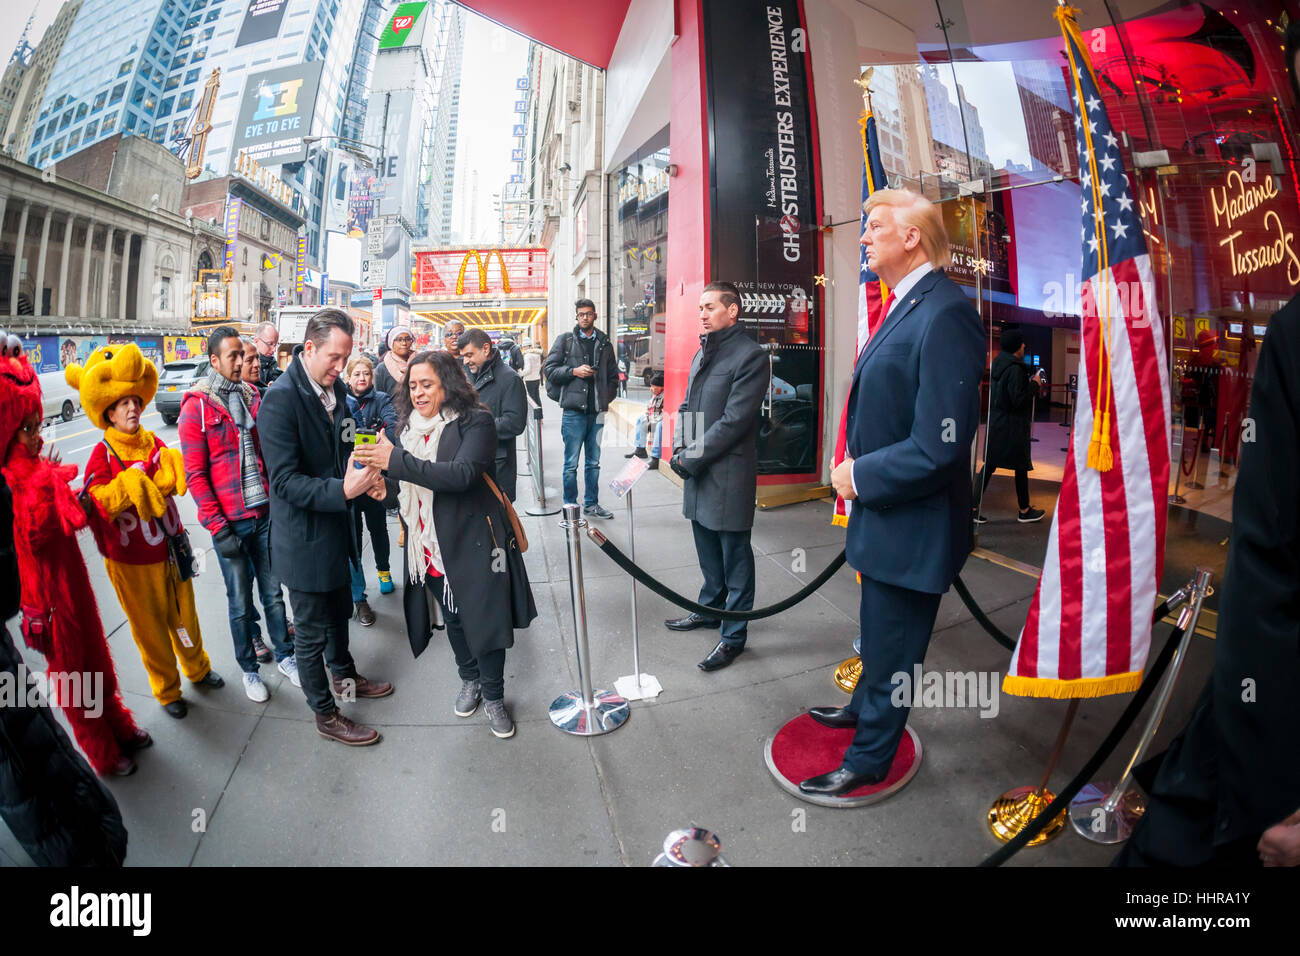 New York, USA. 20th Jan, 2017. Tourists pose for photographs with a wax figure of President Donald Trump in front of Madame Tussaud's Wax Museum in Times Square after the inauguration of Trump as the 45th president of the United States on Friday, January 20, 2017. ( © Richard B. Levine) Credit: Richard Levine/Alamy Live News Stock Photo